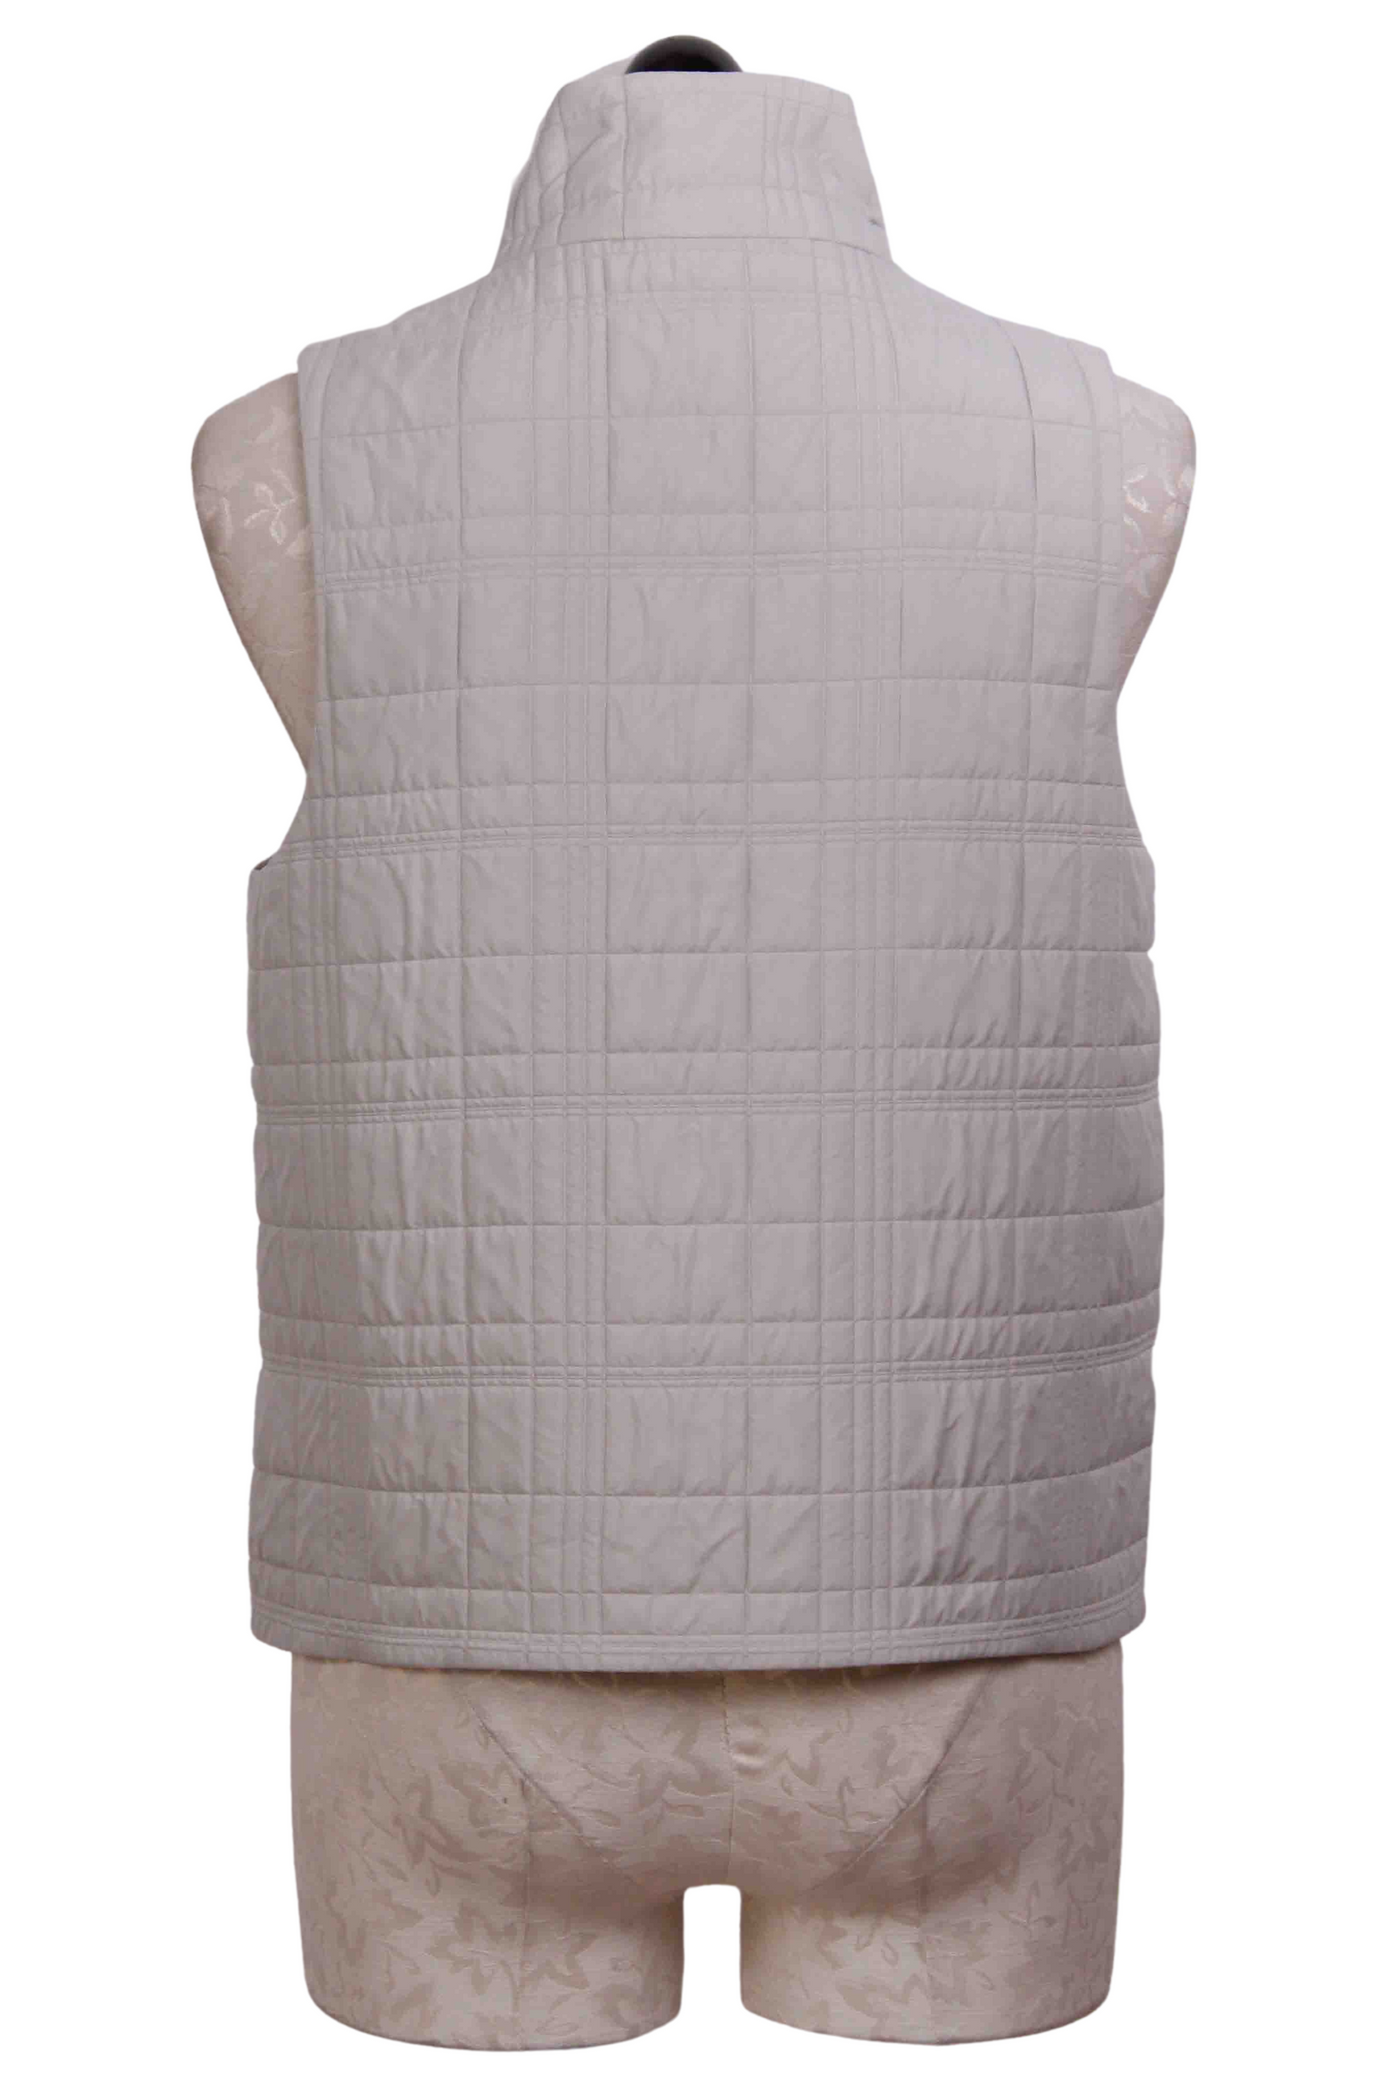 back view of Sand colored Zip Front Quilt Modern Vest by Liv by Habitat